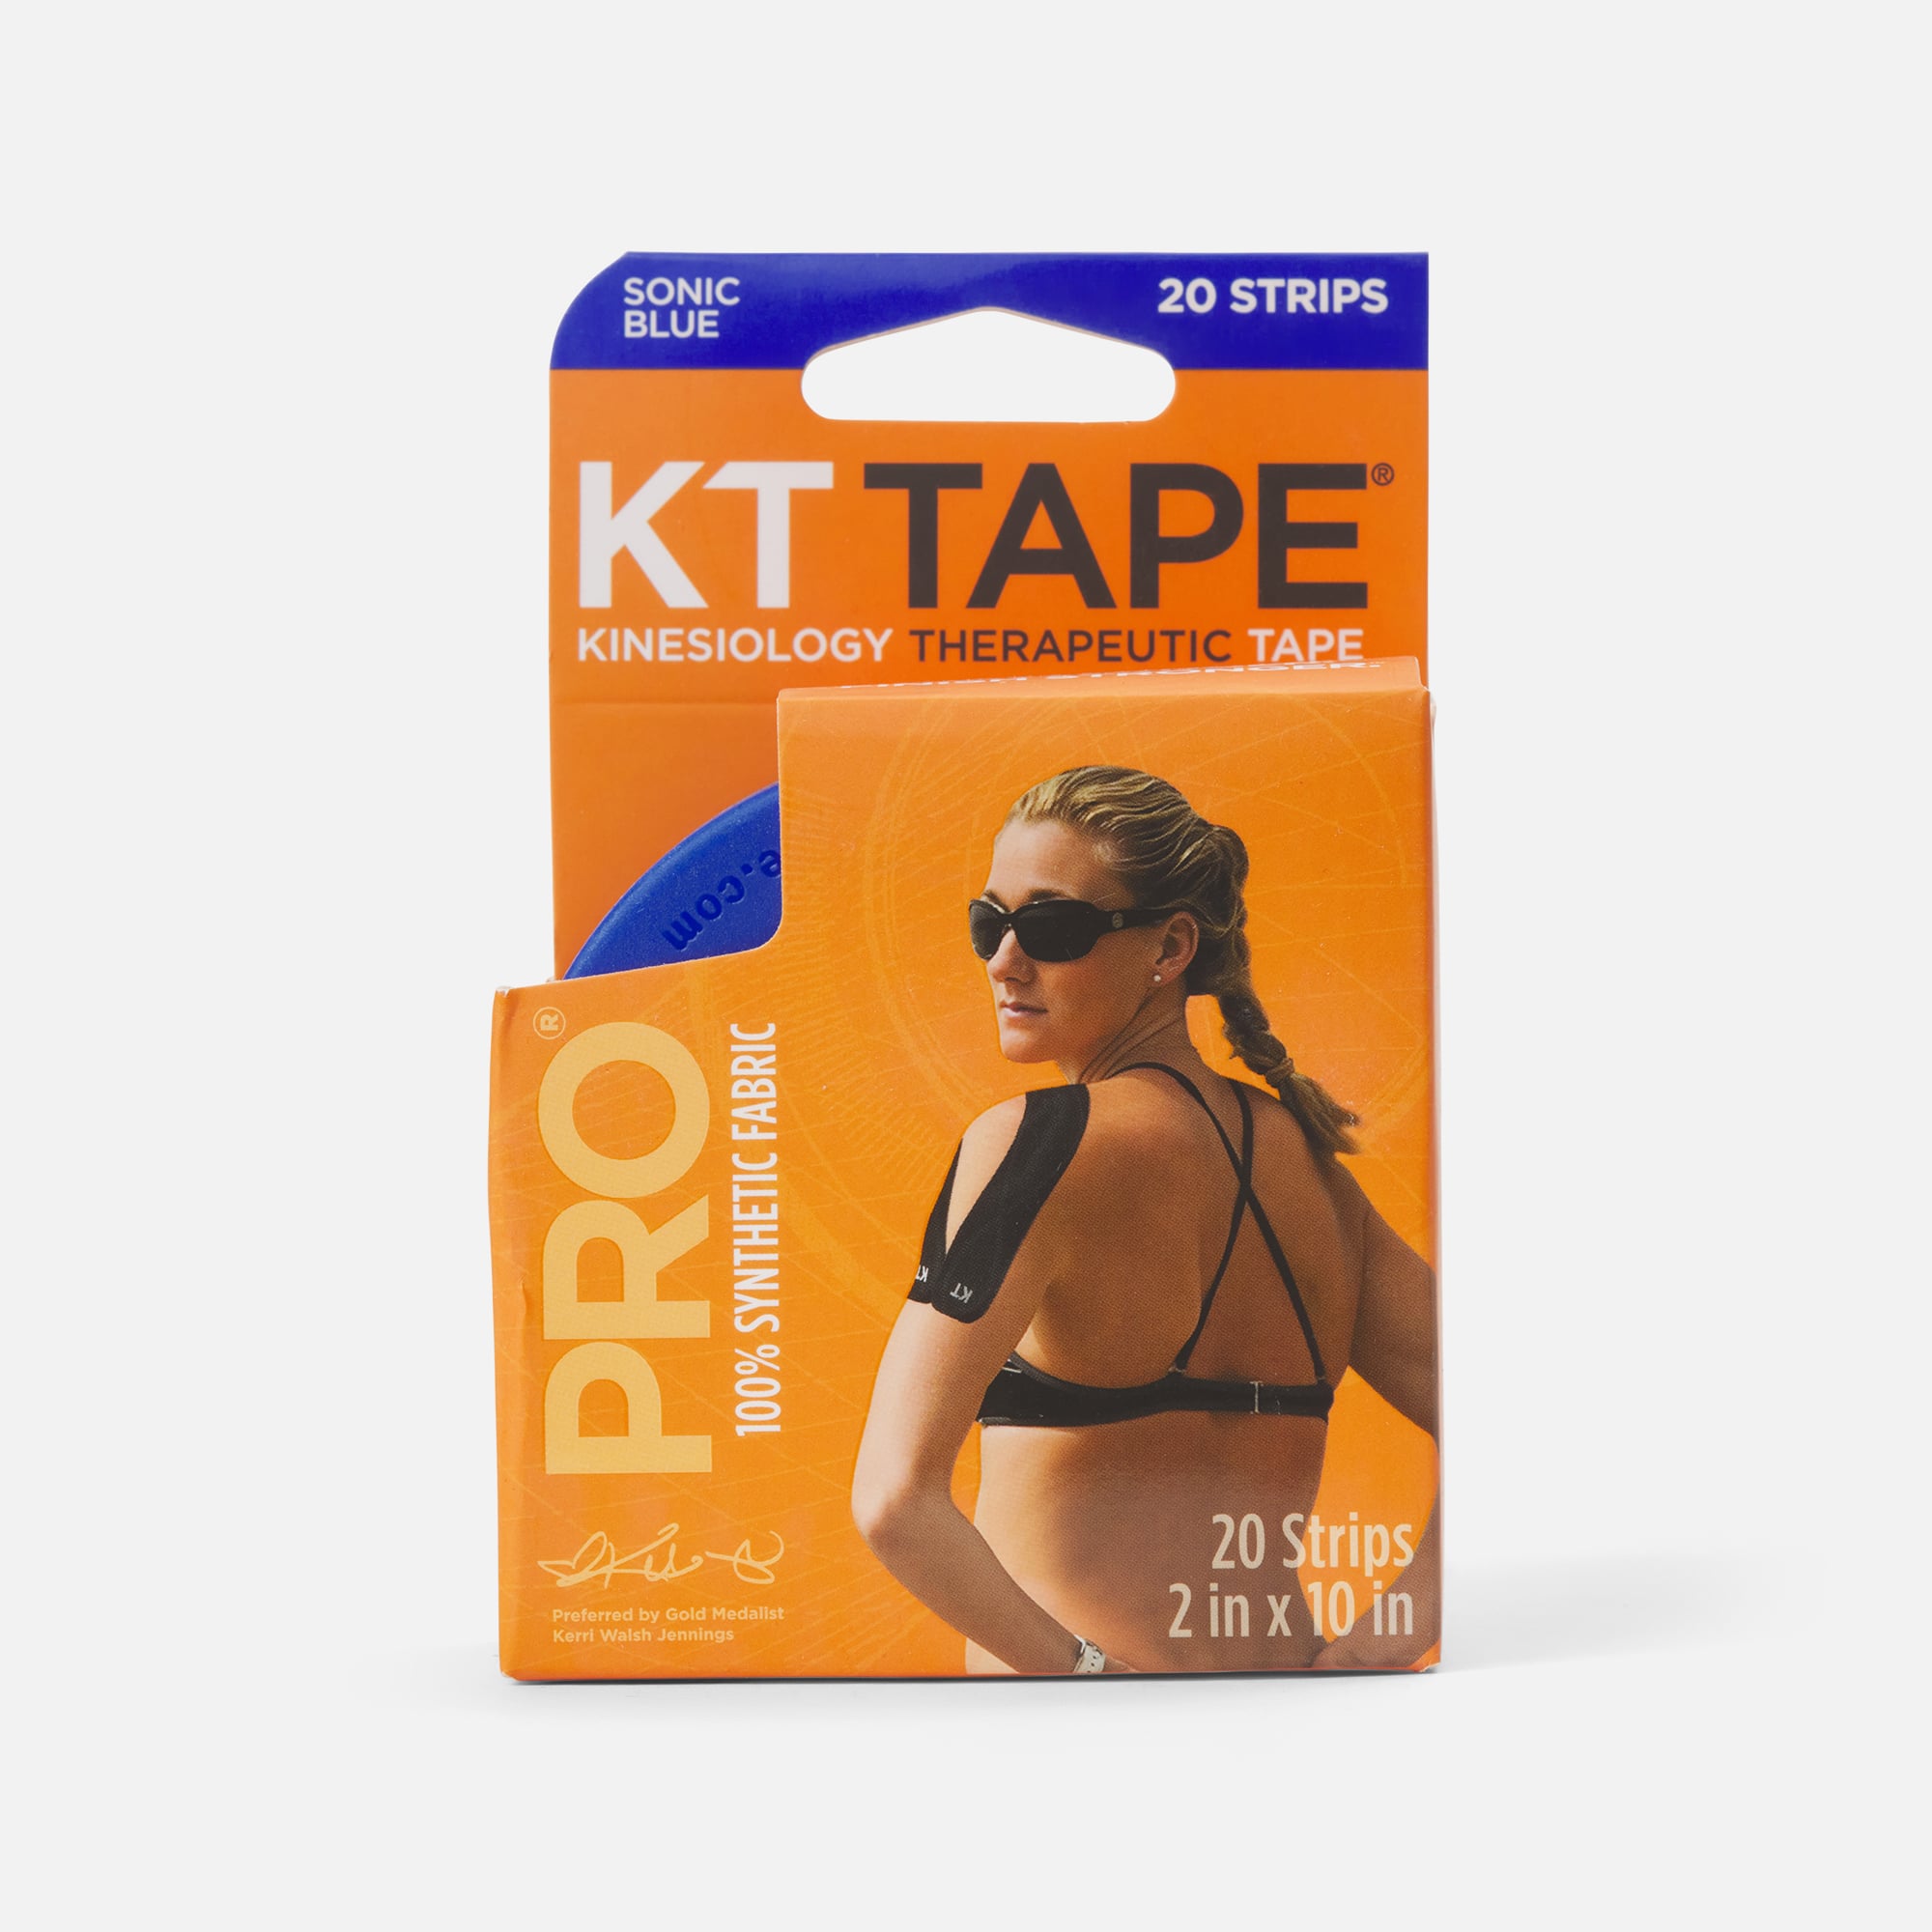 KT Tape Pro Synthetic Tape - Sonic Blue, 20 ct.